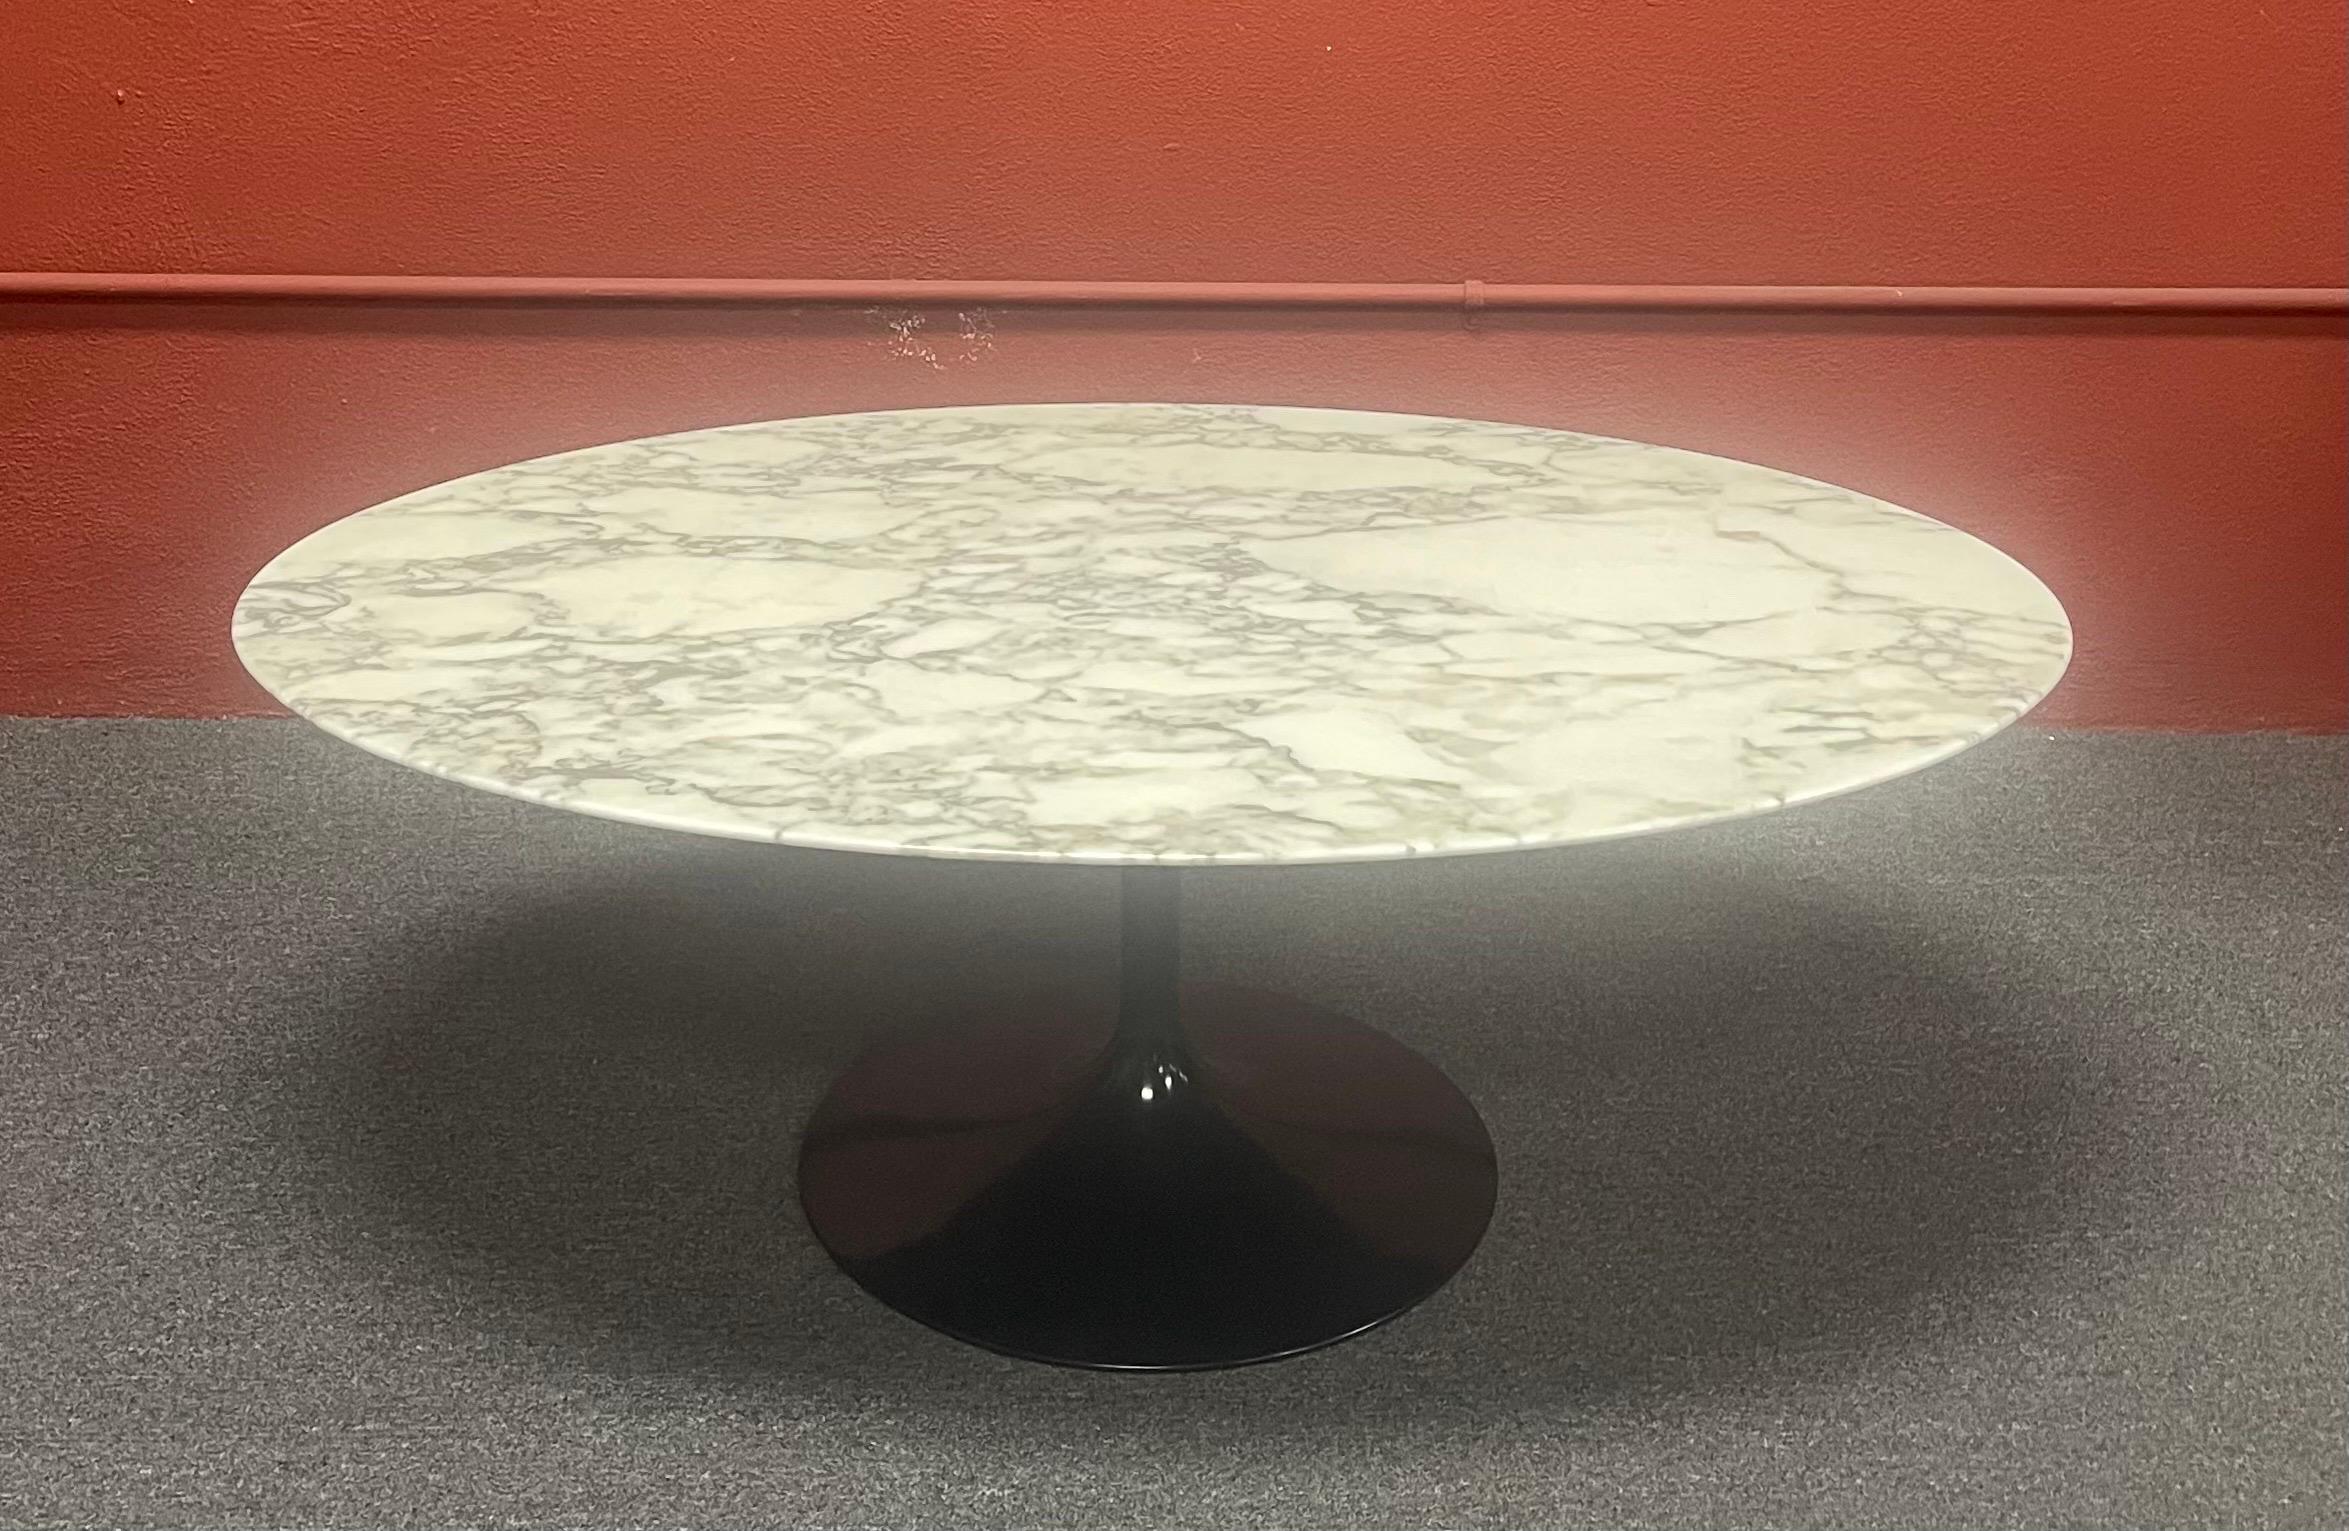 Contemporary Authentic Polished Carrara Marble Top Coffee Table by Eero Saarinen for Knoll